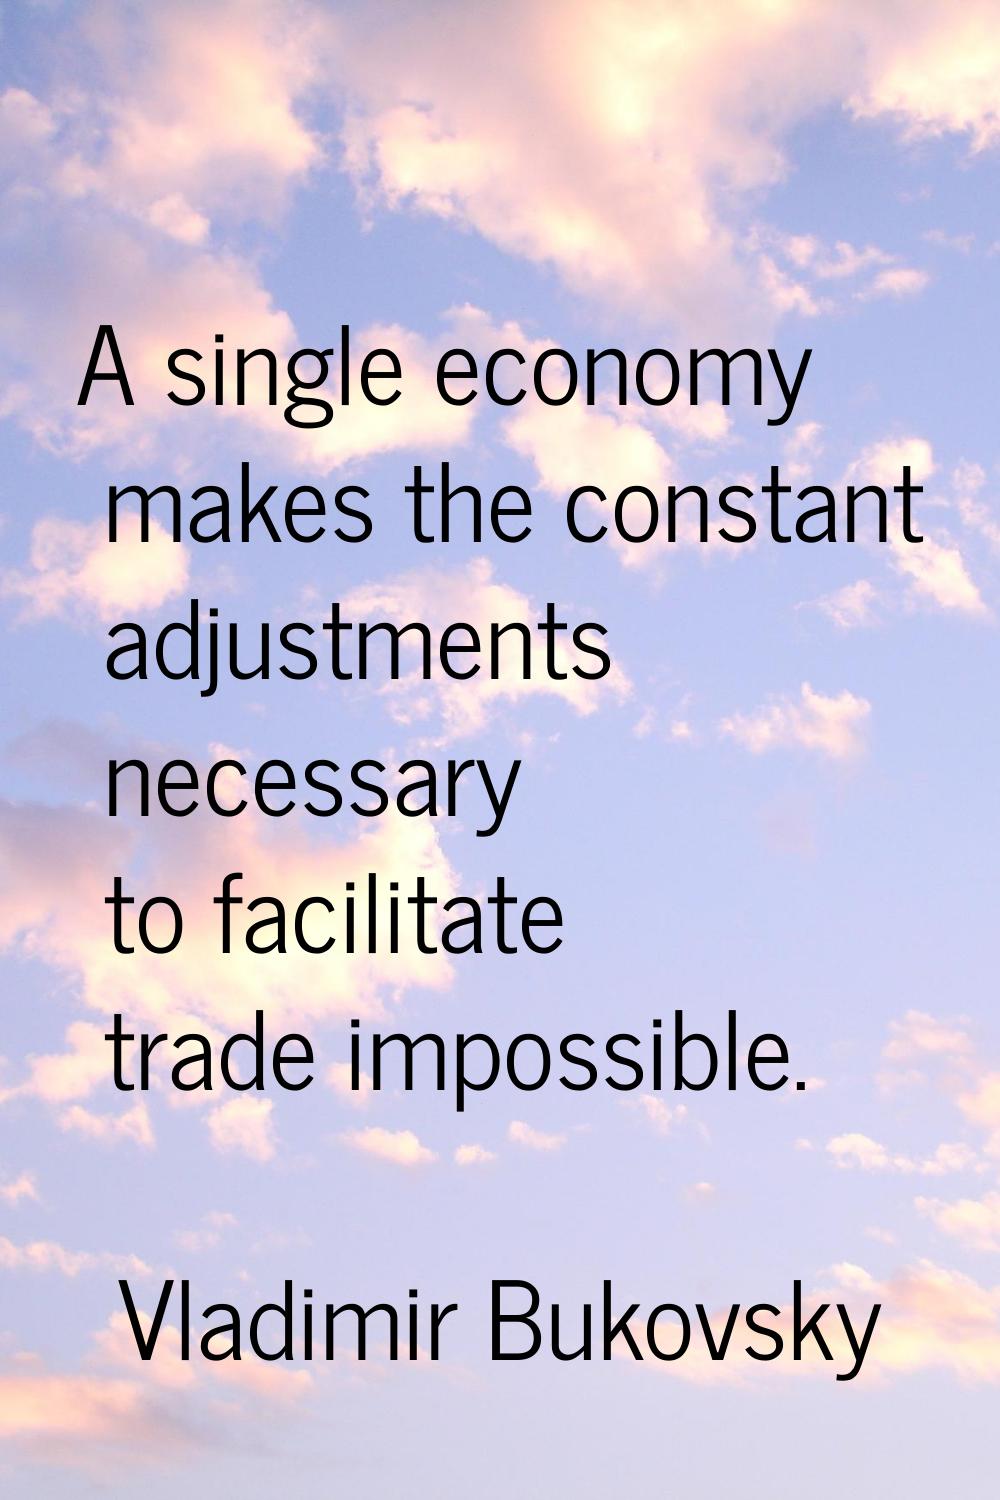 A single economy makes the constant adjustments necessary to facilitate trade impossible.